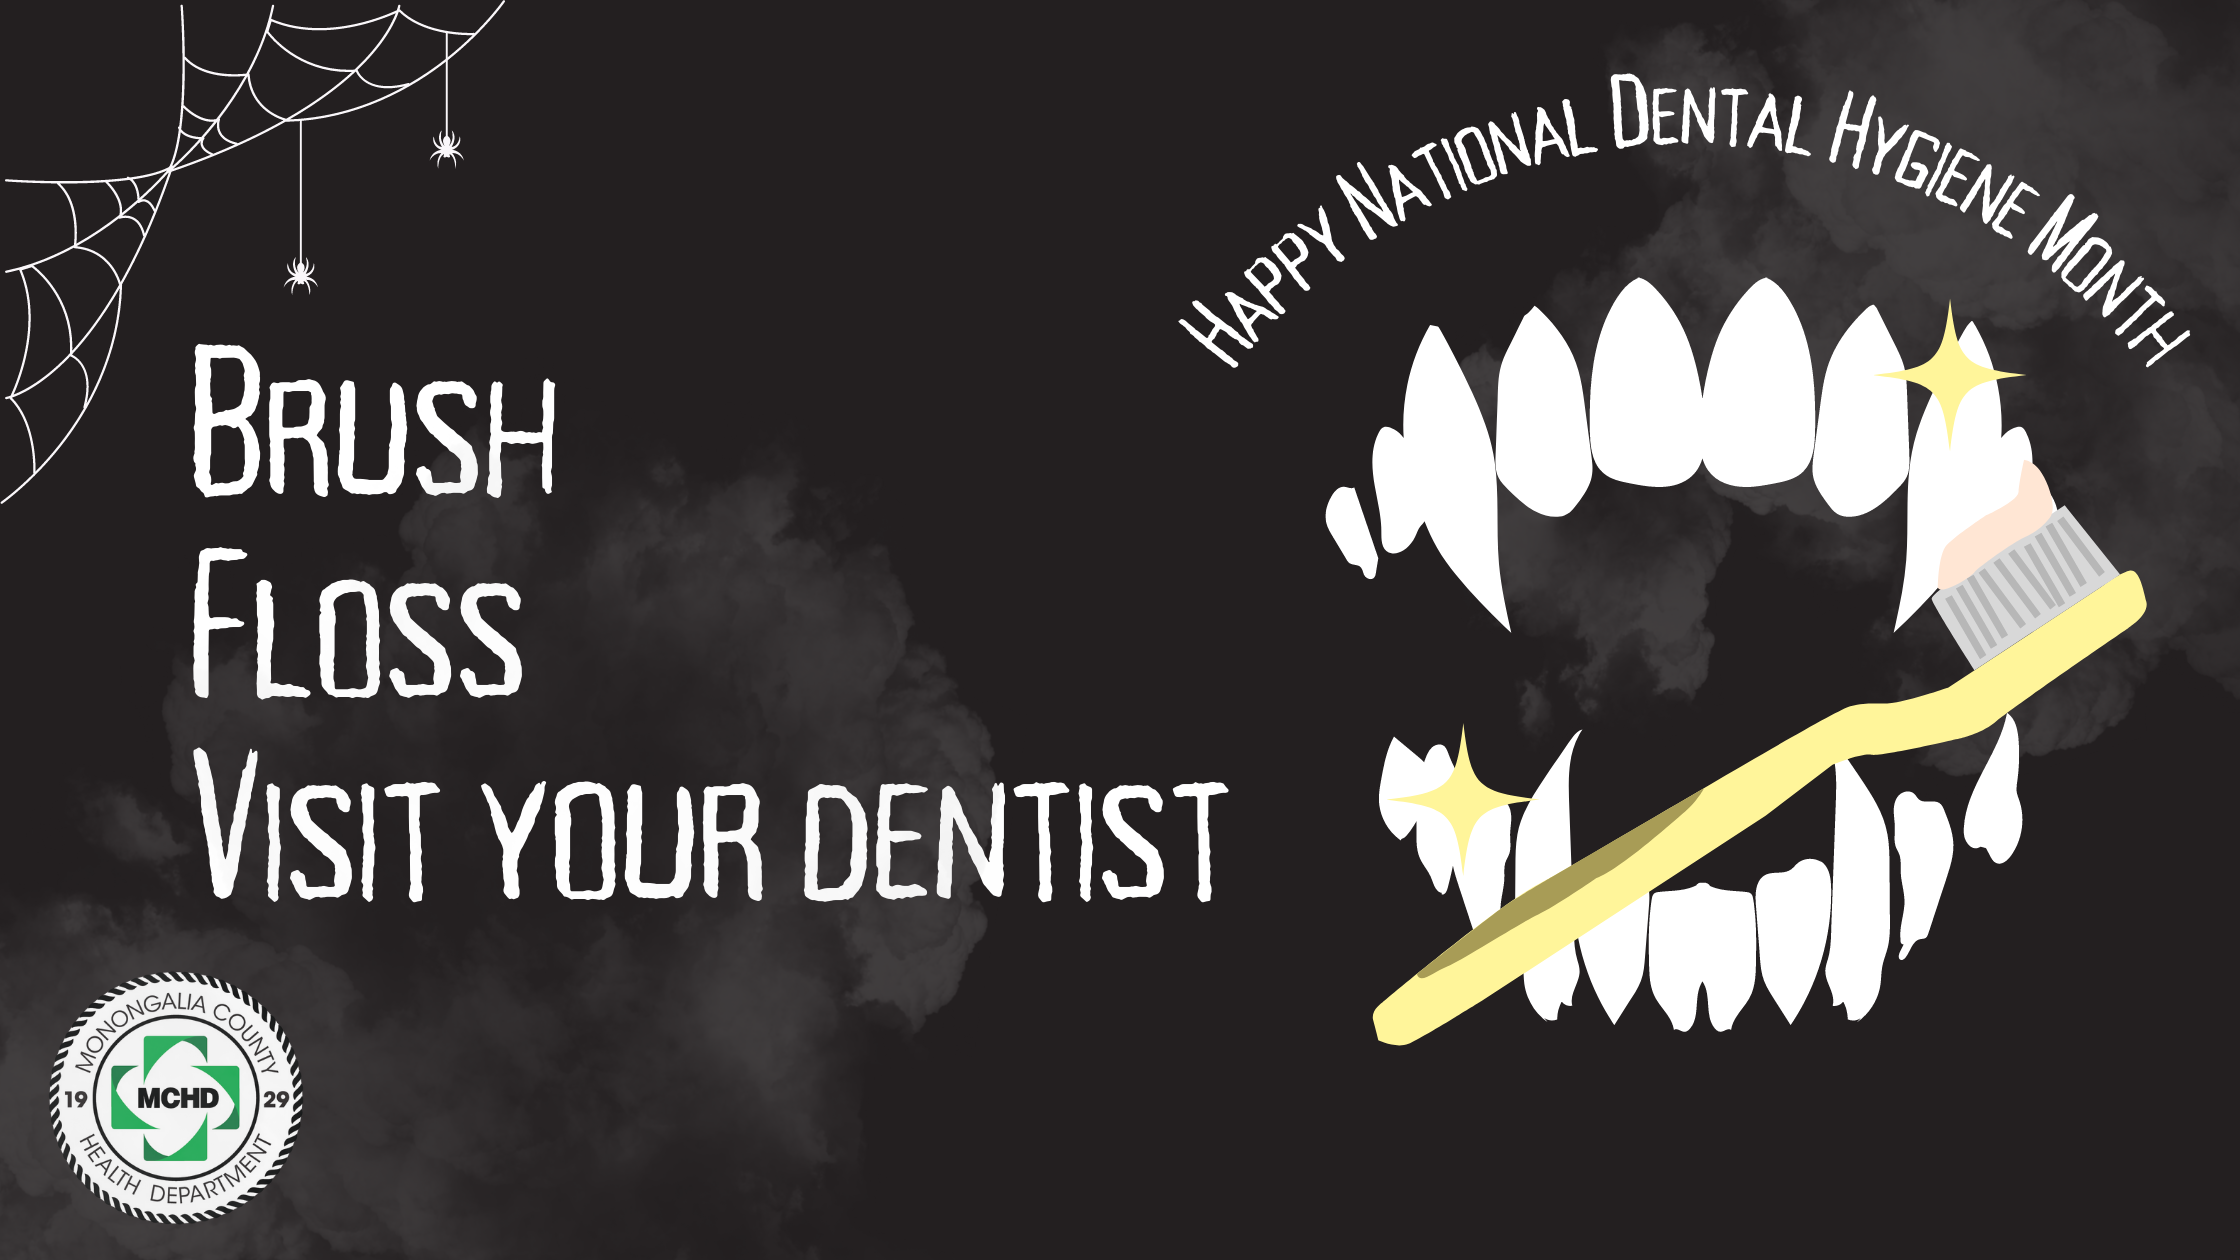 National Dental Hygiene Month doesn't have to be spooky